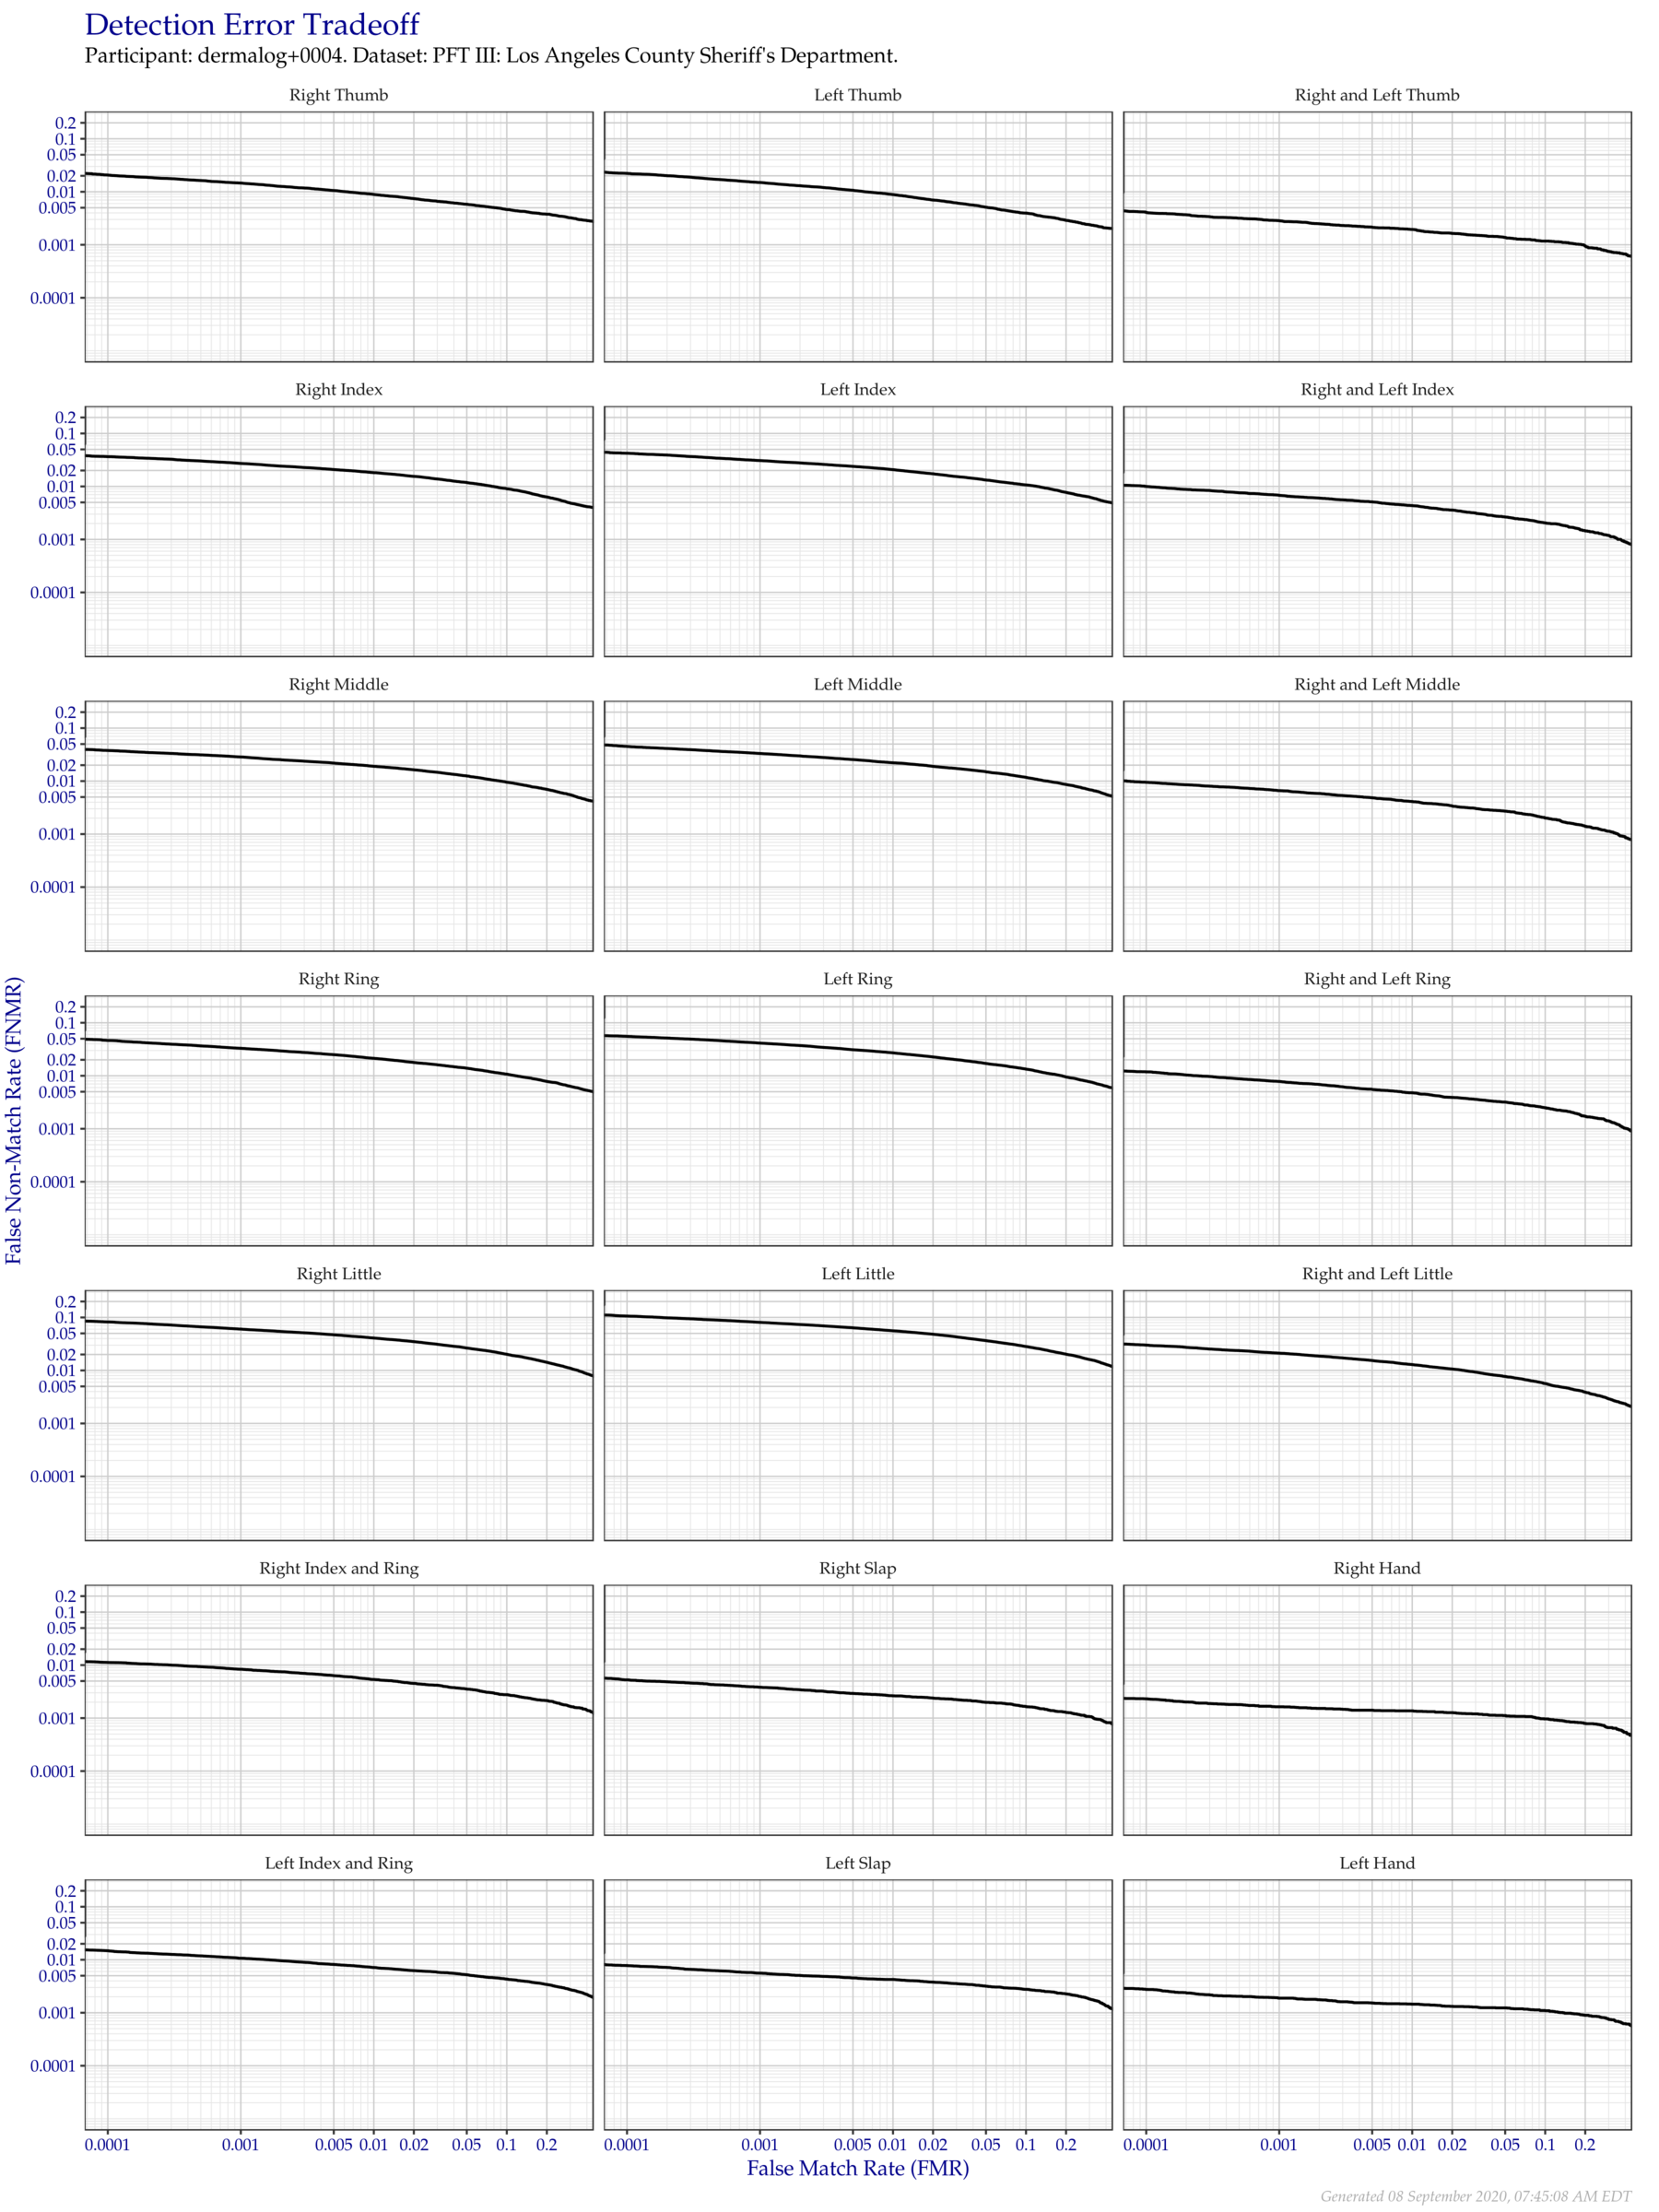 Detection error tradeoff of all comparisons from all fingers in the PFT III LASD dataset, separated by finger position. Combined finger positions were generated by sum fusion.